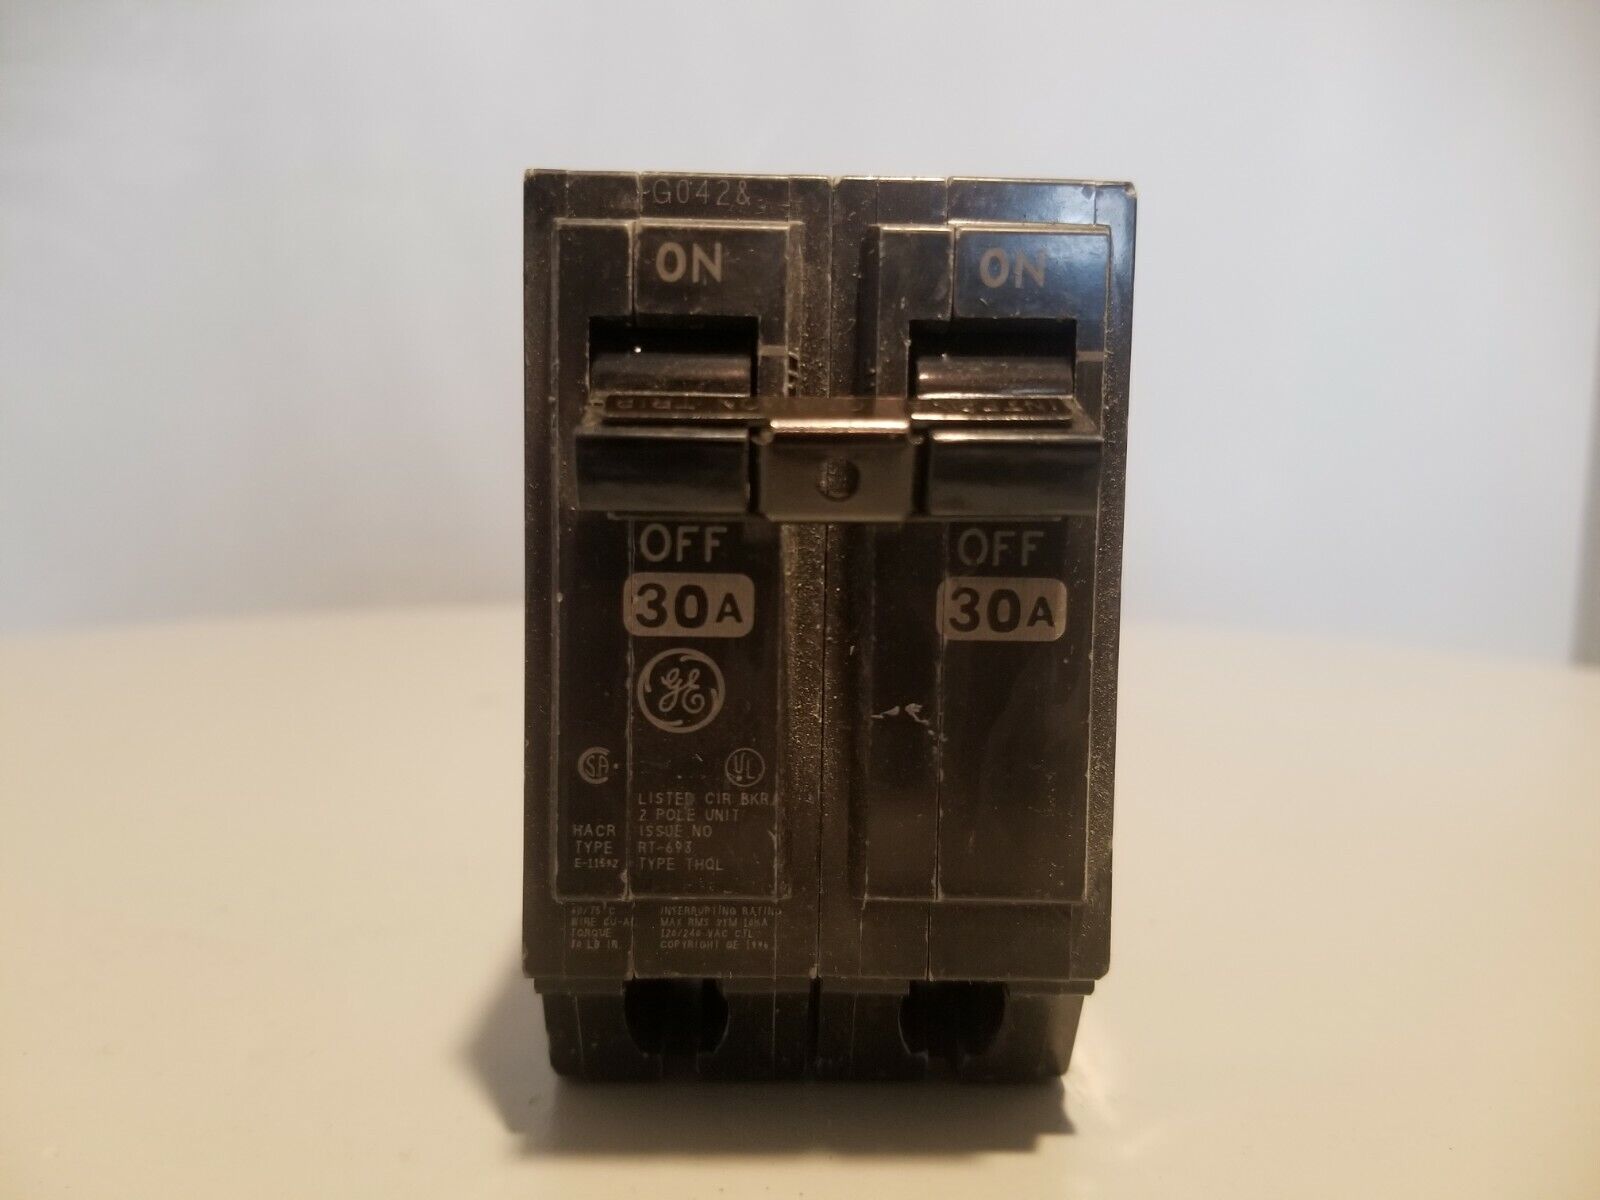 General Electric Circuit Breaker 2P RT-6 Max 49% OFF online shopping 120 Type 240VAC 30A